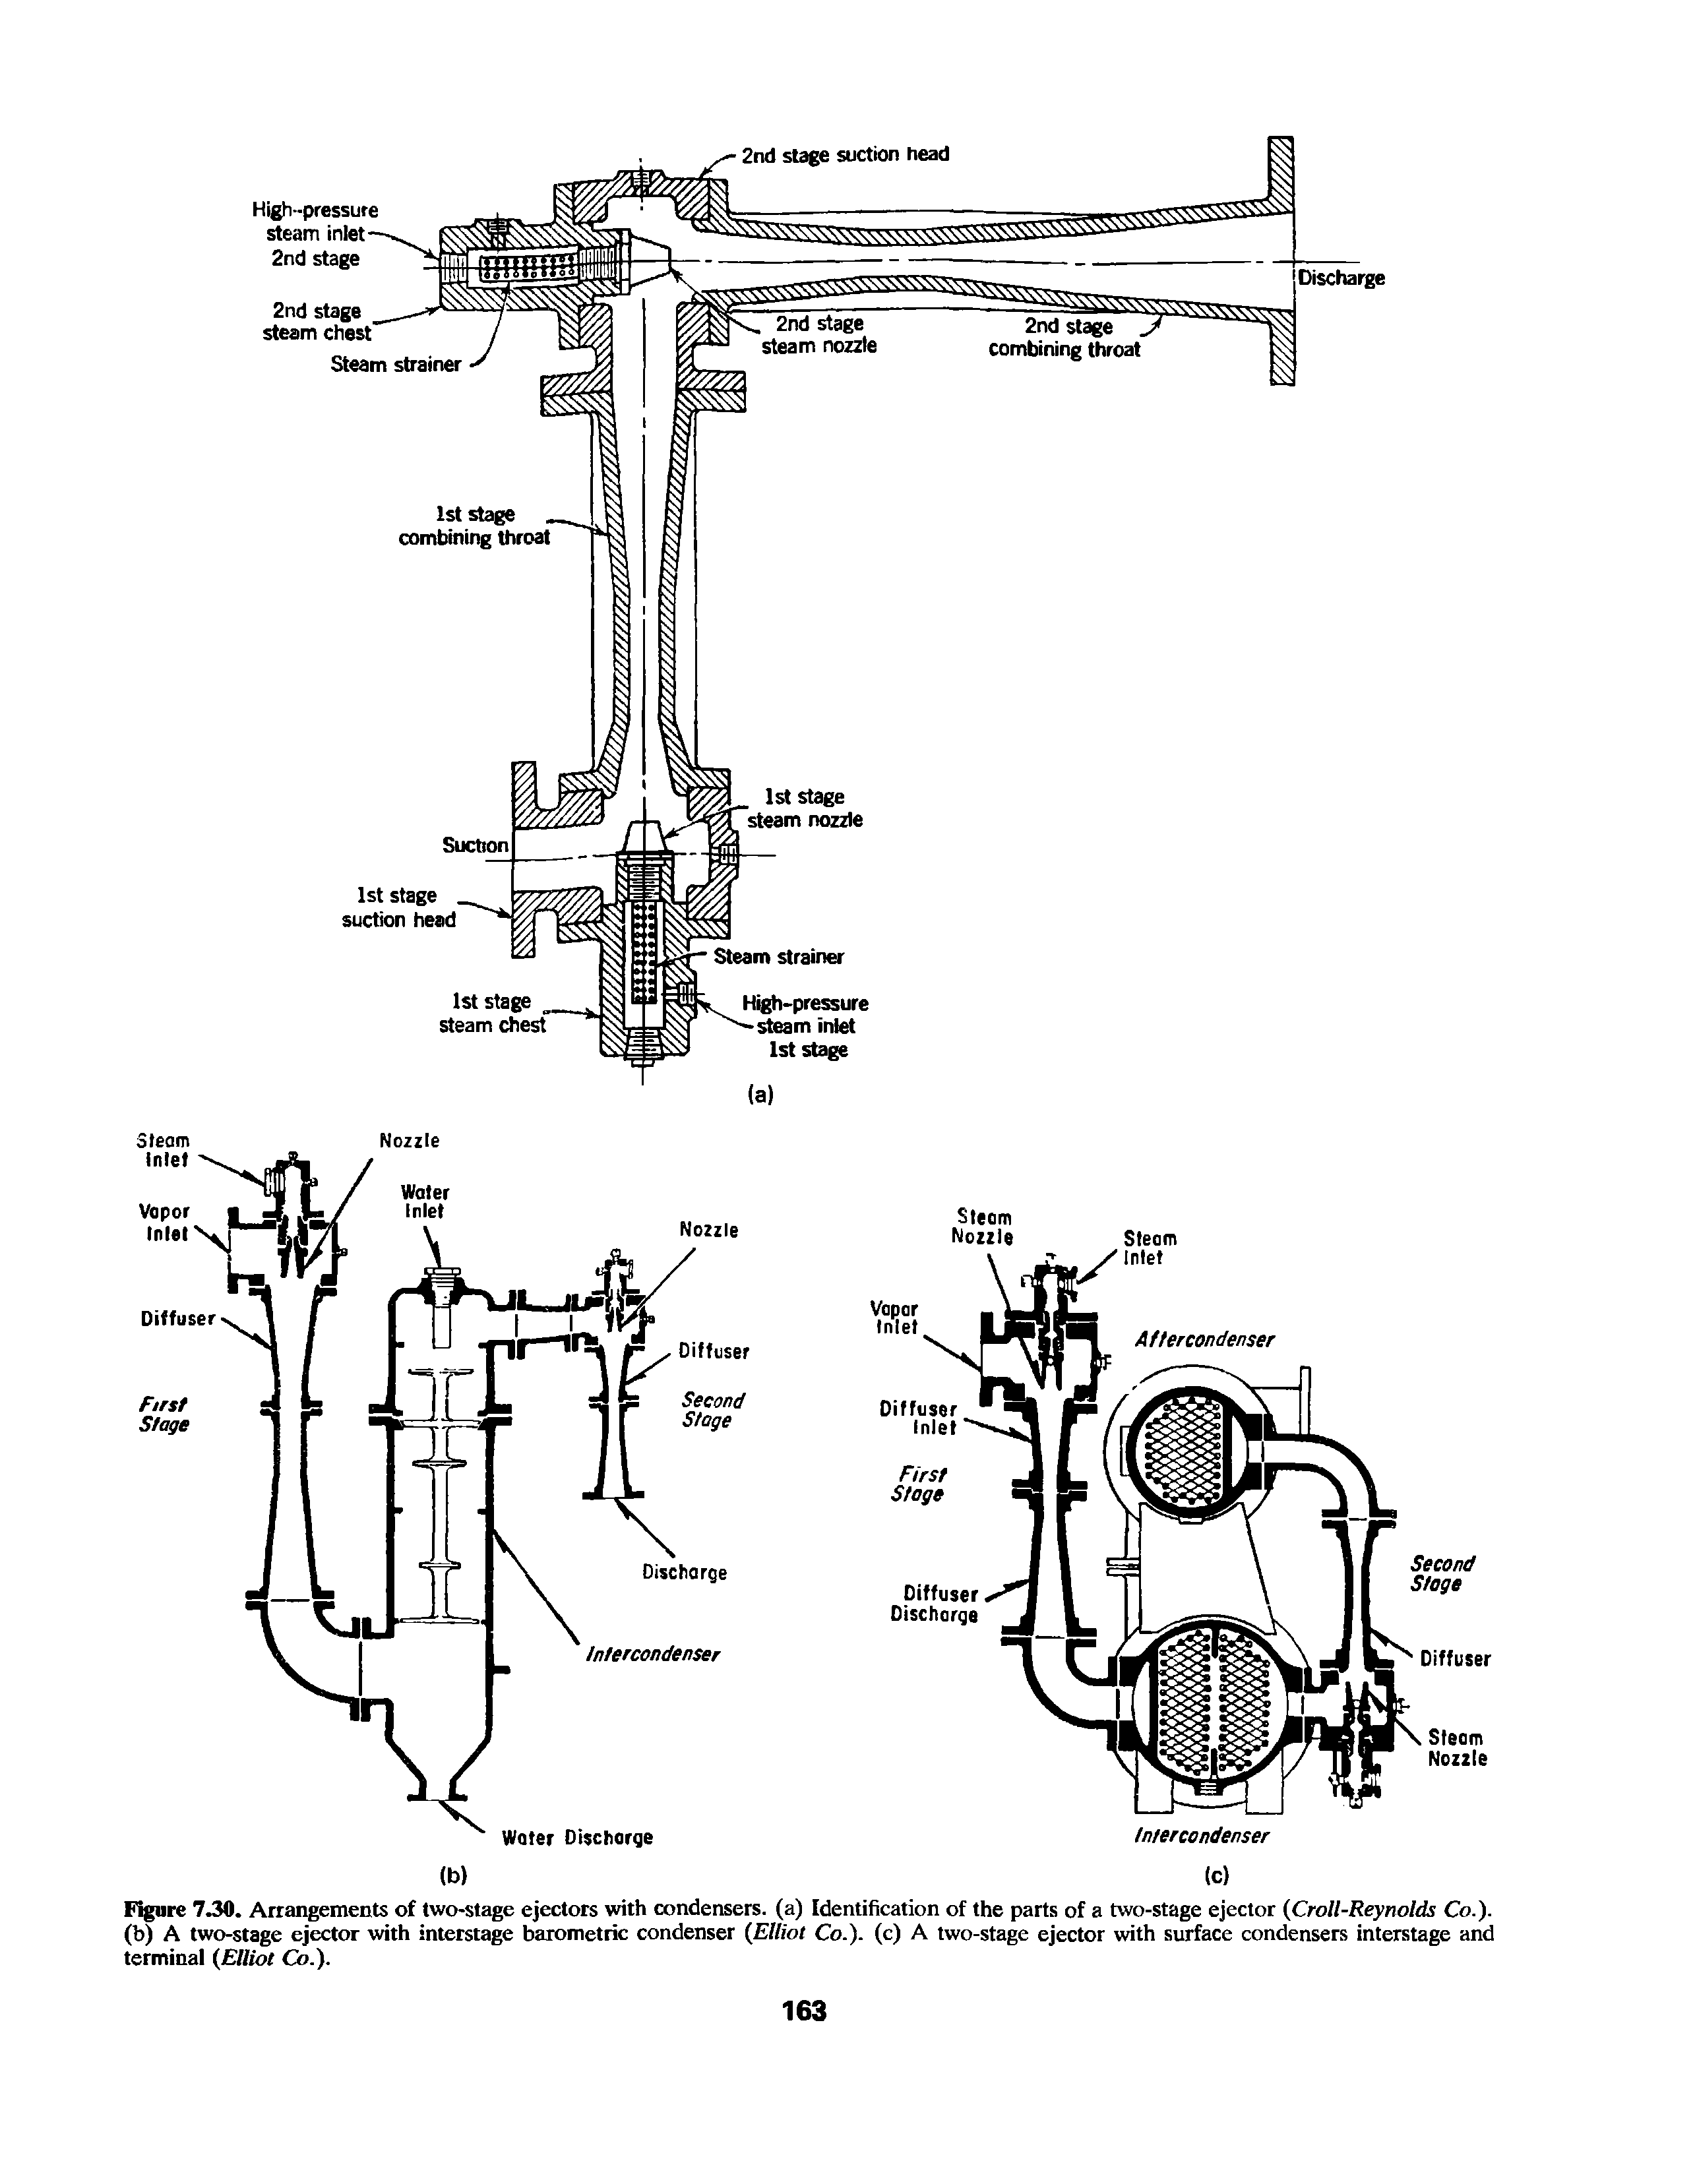 Figure 7.30. Arrangements of two-stage ejectors with condensers, (a) Identification of the parts of a two-stage ejector (Croll-Reynolds Co.). (b) A two-stage ejector with interstage barometric condenser (Elliot Co.), (c) A two-stage ejector with surface condensers interstage and terminal (Elliot Co.).